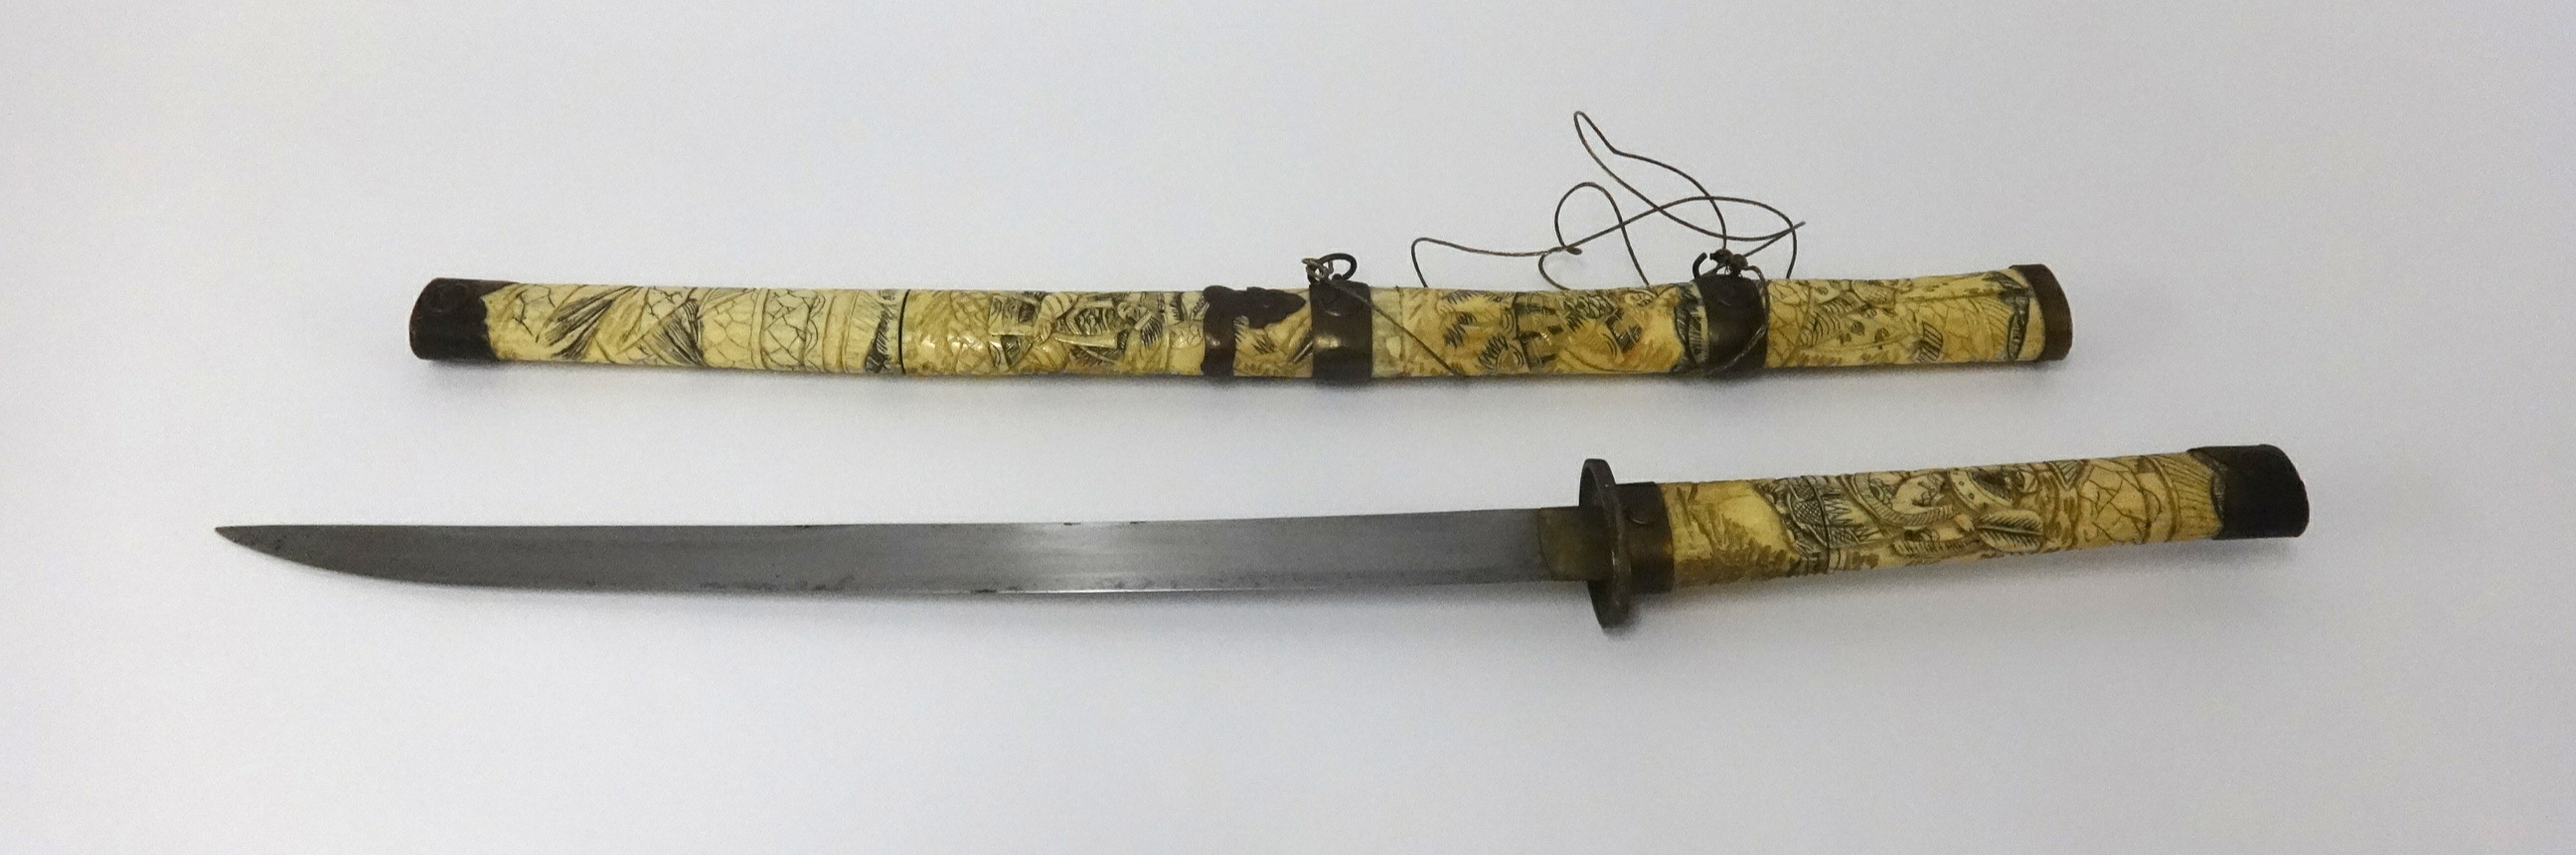 A Japanese? Short sword with carved bone and metal mounted scabbard and handle decorated with - Image 2 of 2